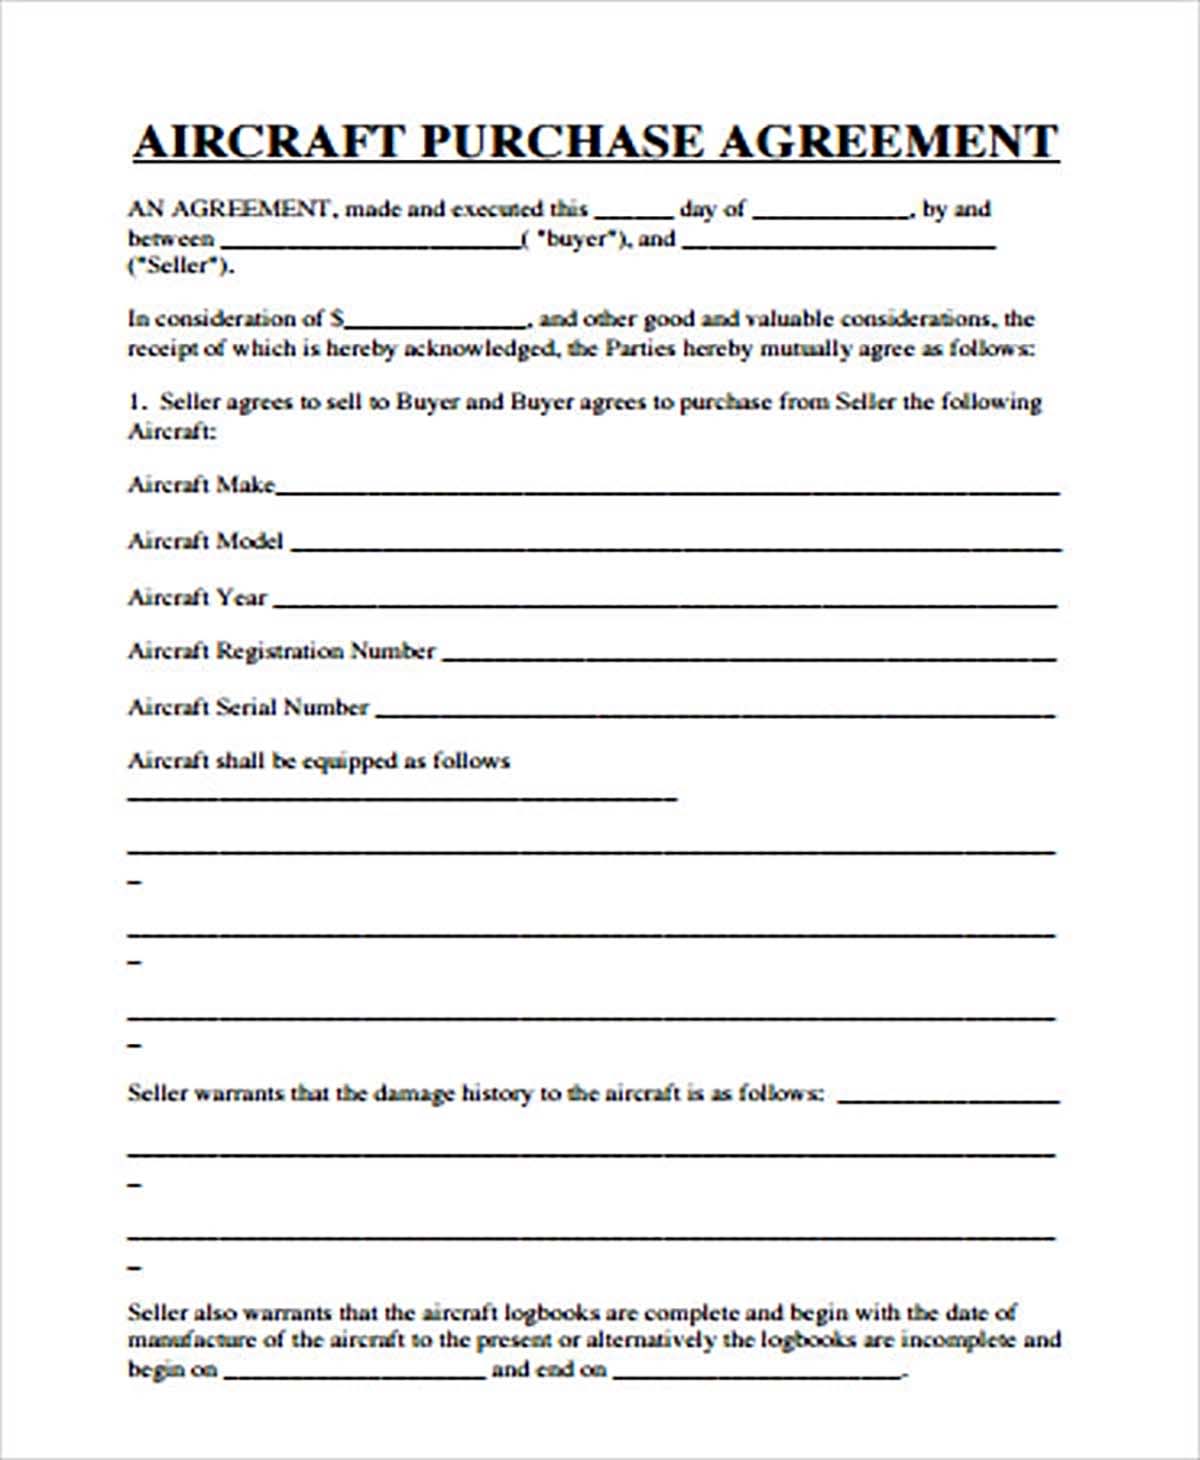 Aircraft Purchase Agreement